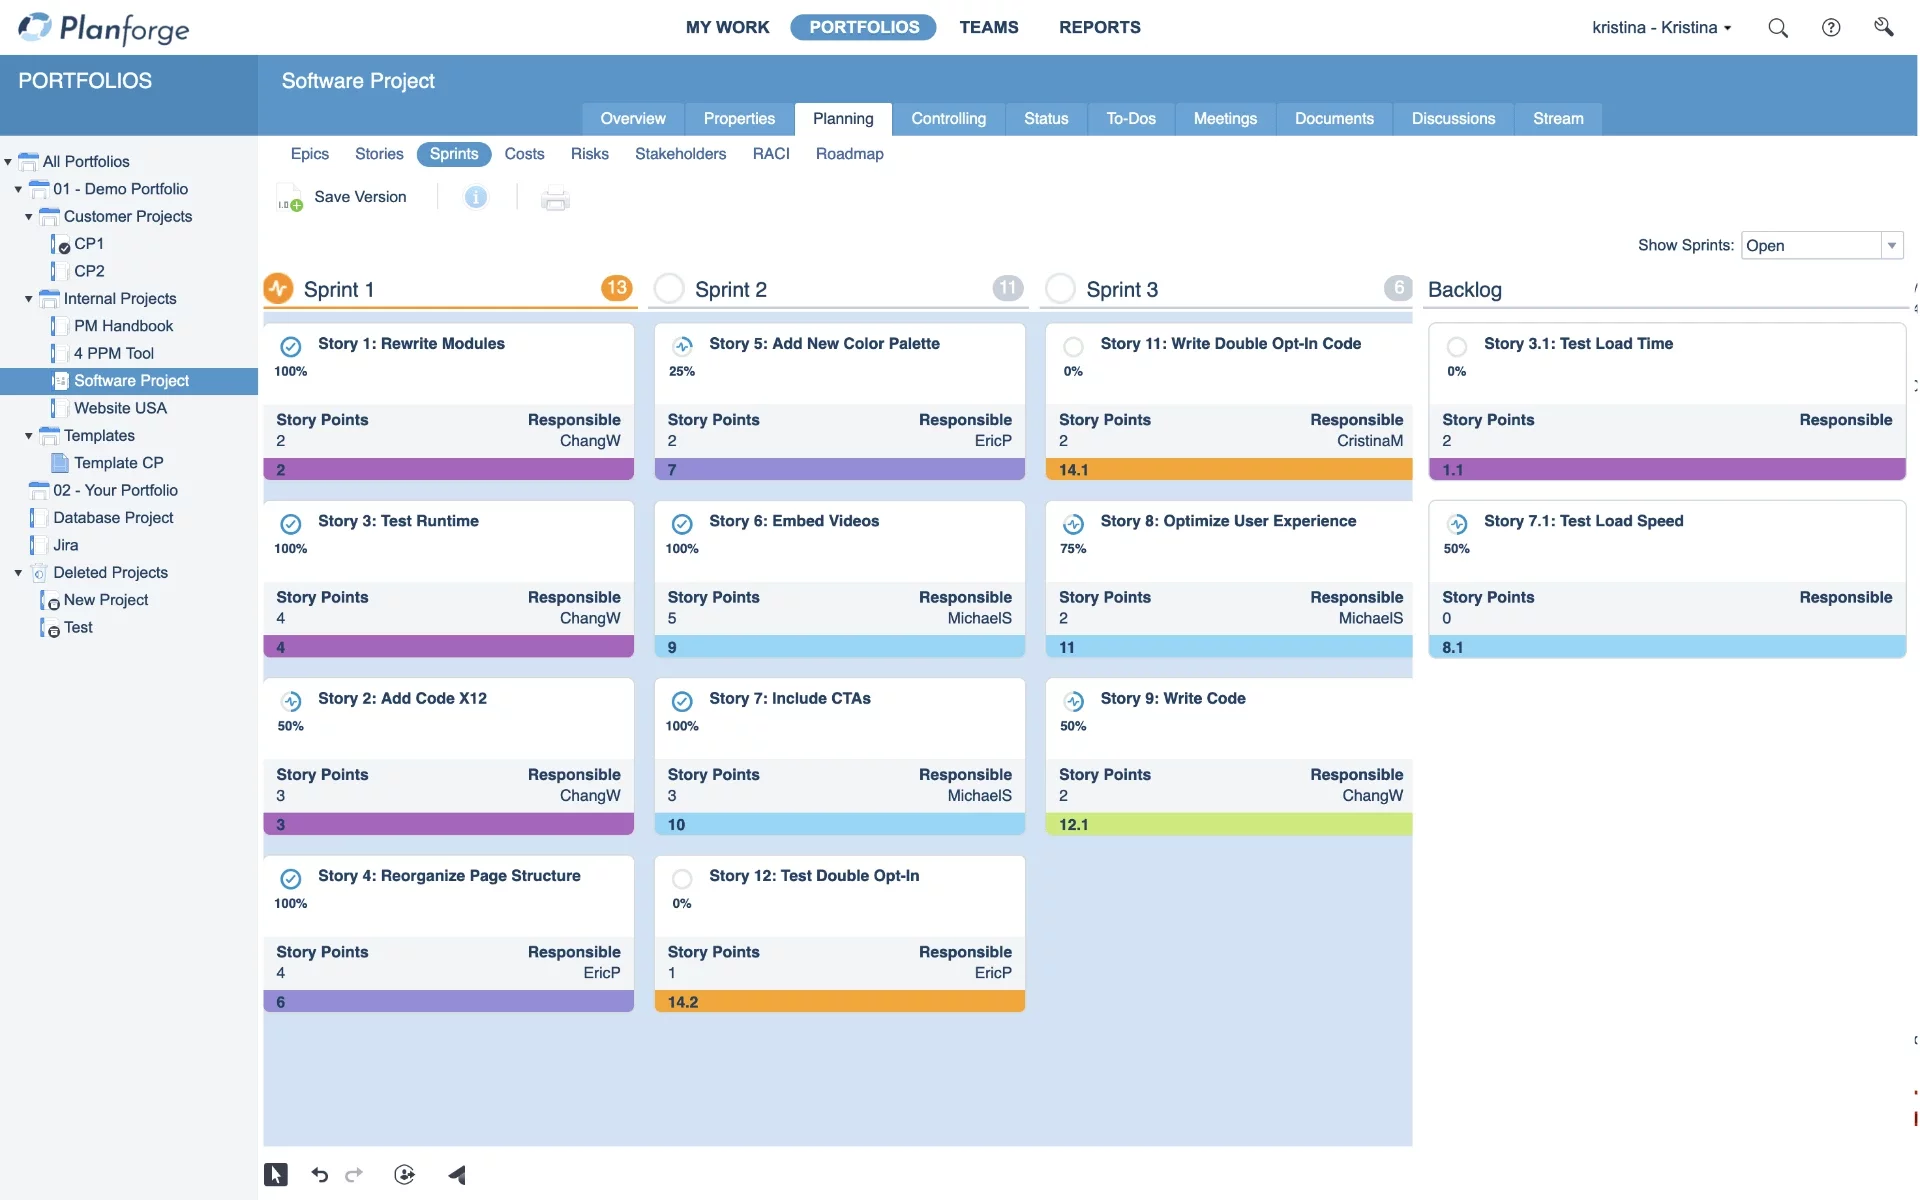 Project Management Agile Project Planning Sprint Board Software by Planforge